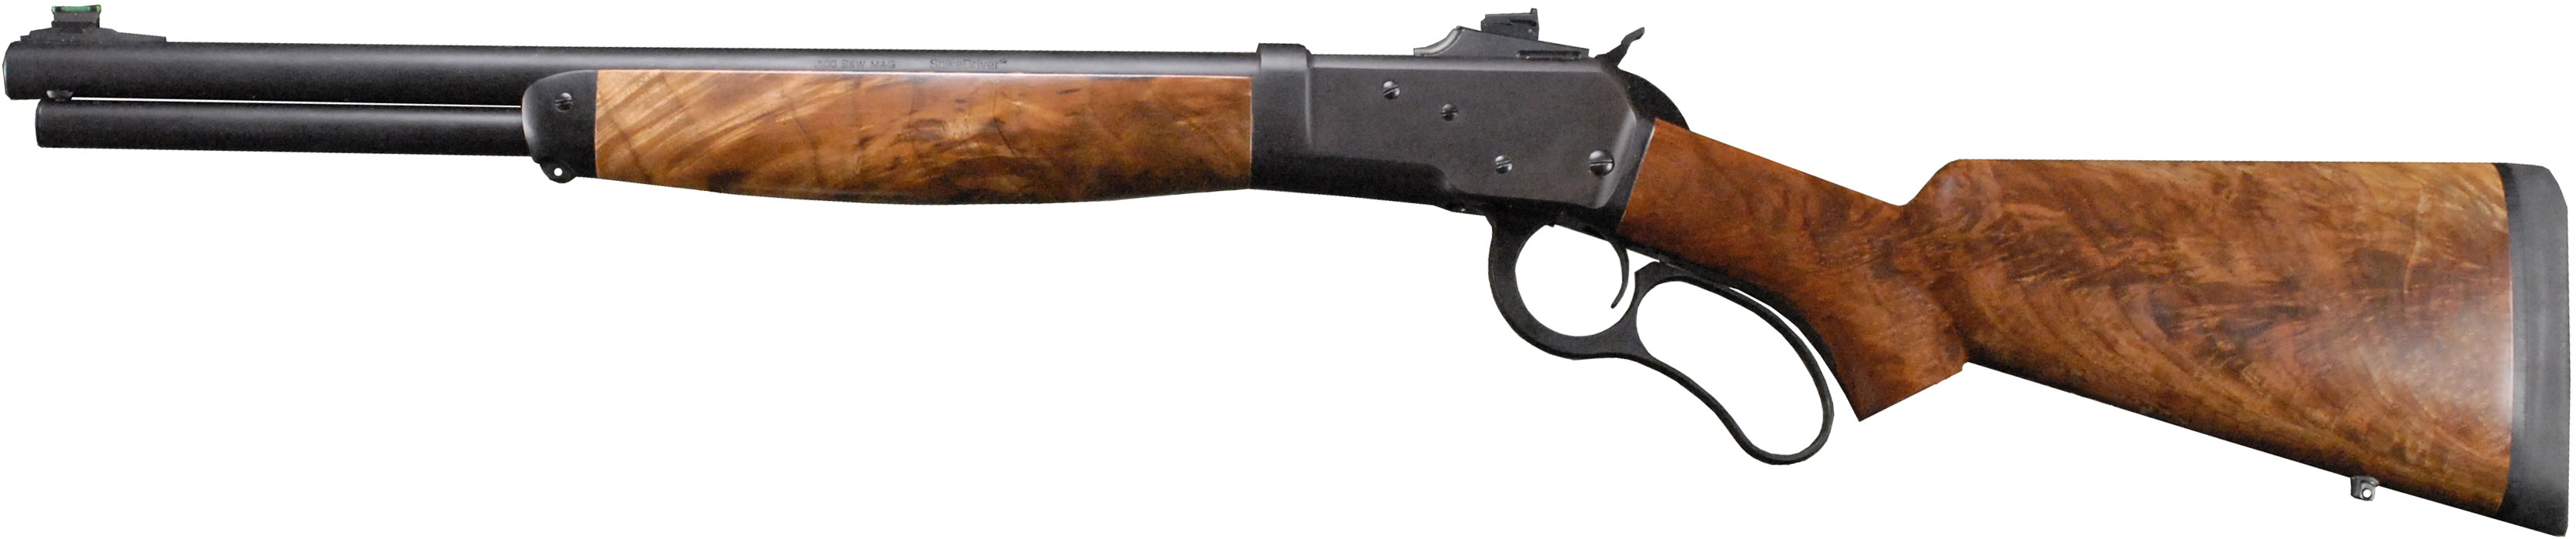 Big Horn Armory Model 89 Carbine Lever Action Rifle M891824, 500 Smith & Wesson, 18 in, #1 Walnut Stock, Black Finish